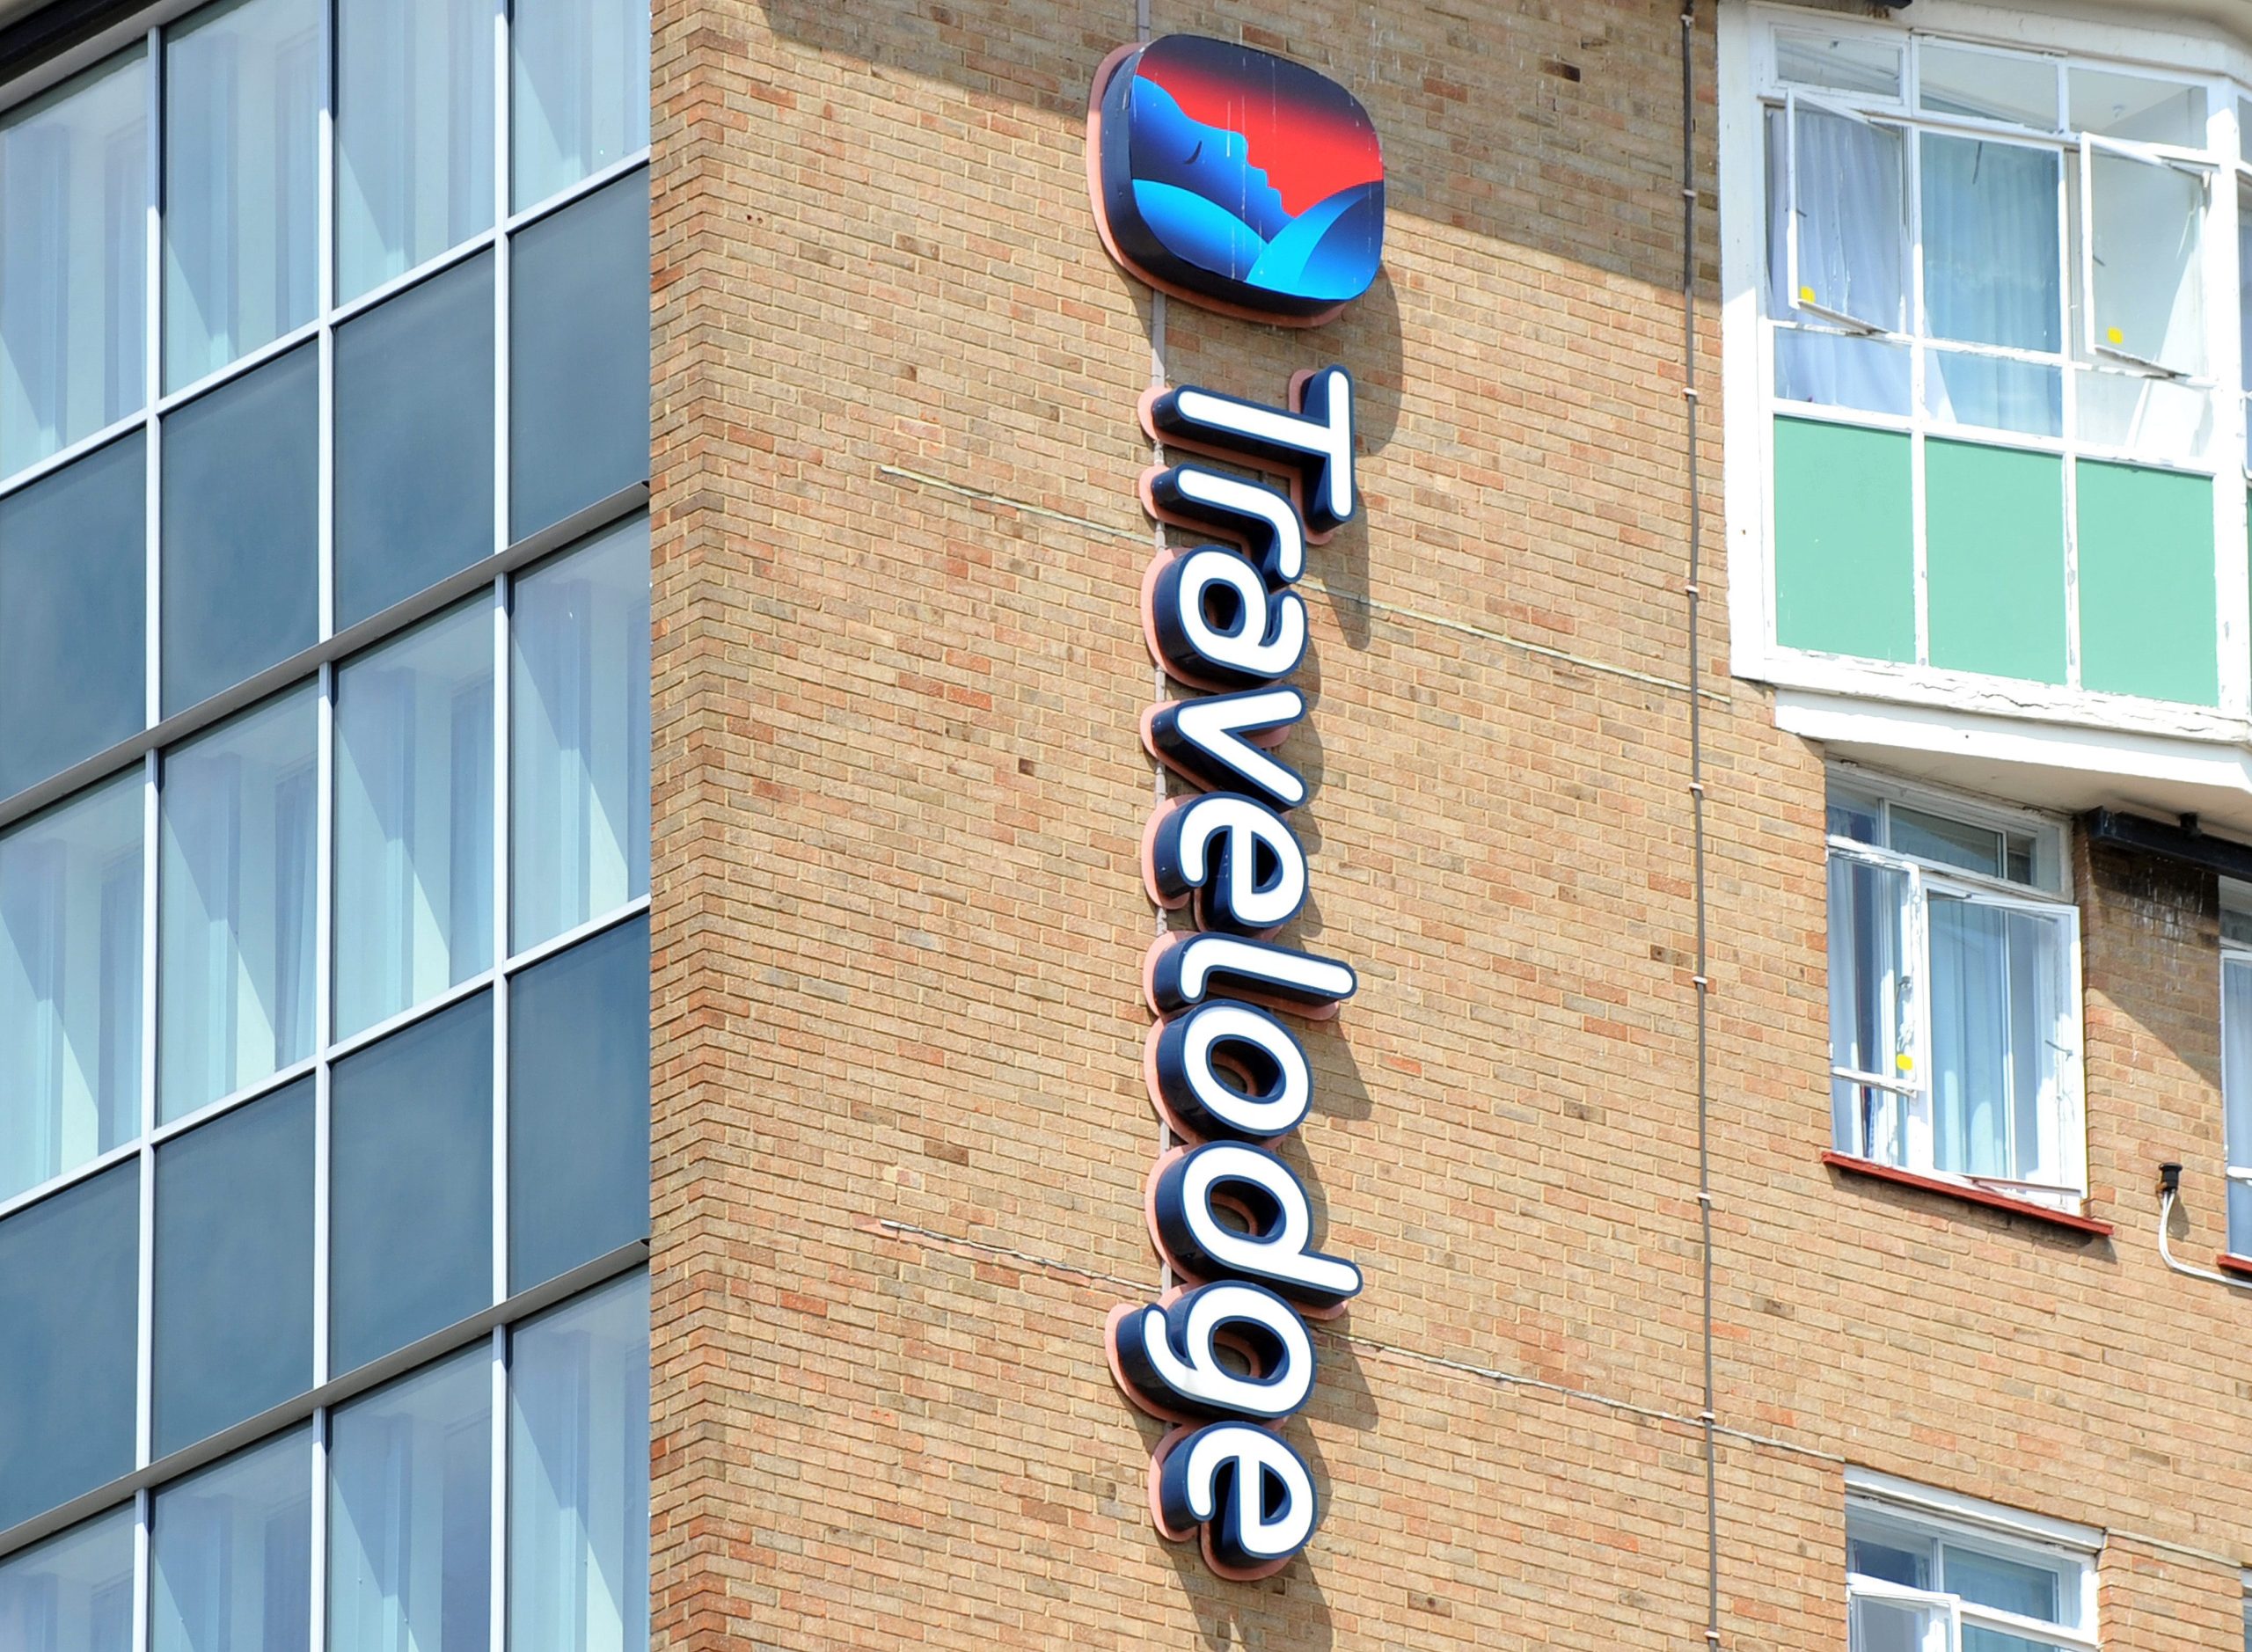 Travelodge expands to southern Spain: British chain snaps up a 117-room hotel in Murcia